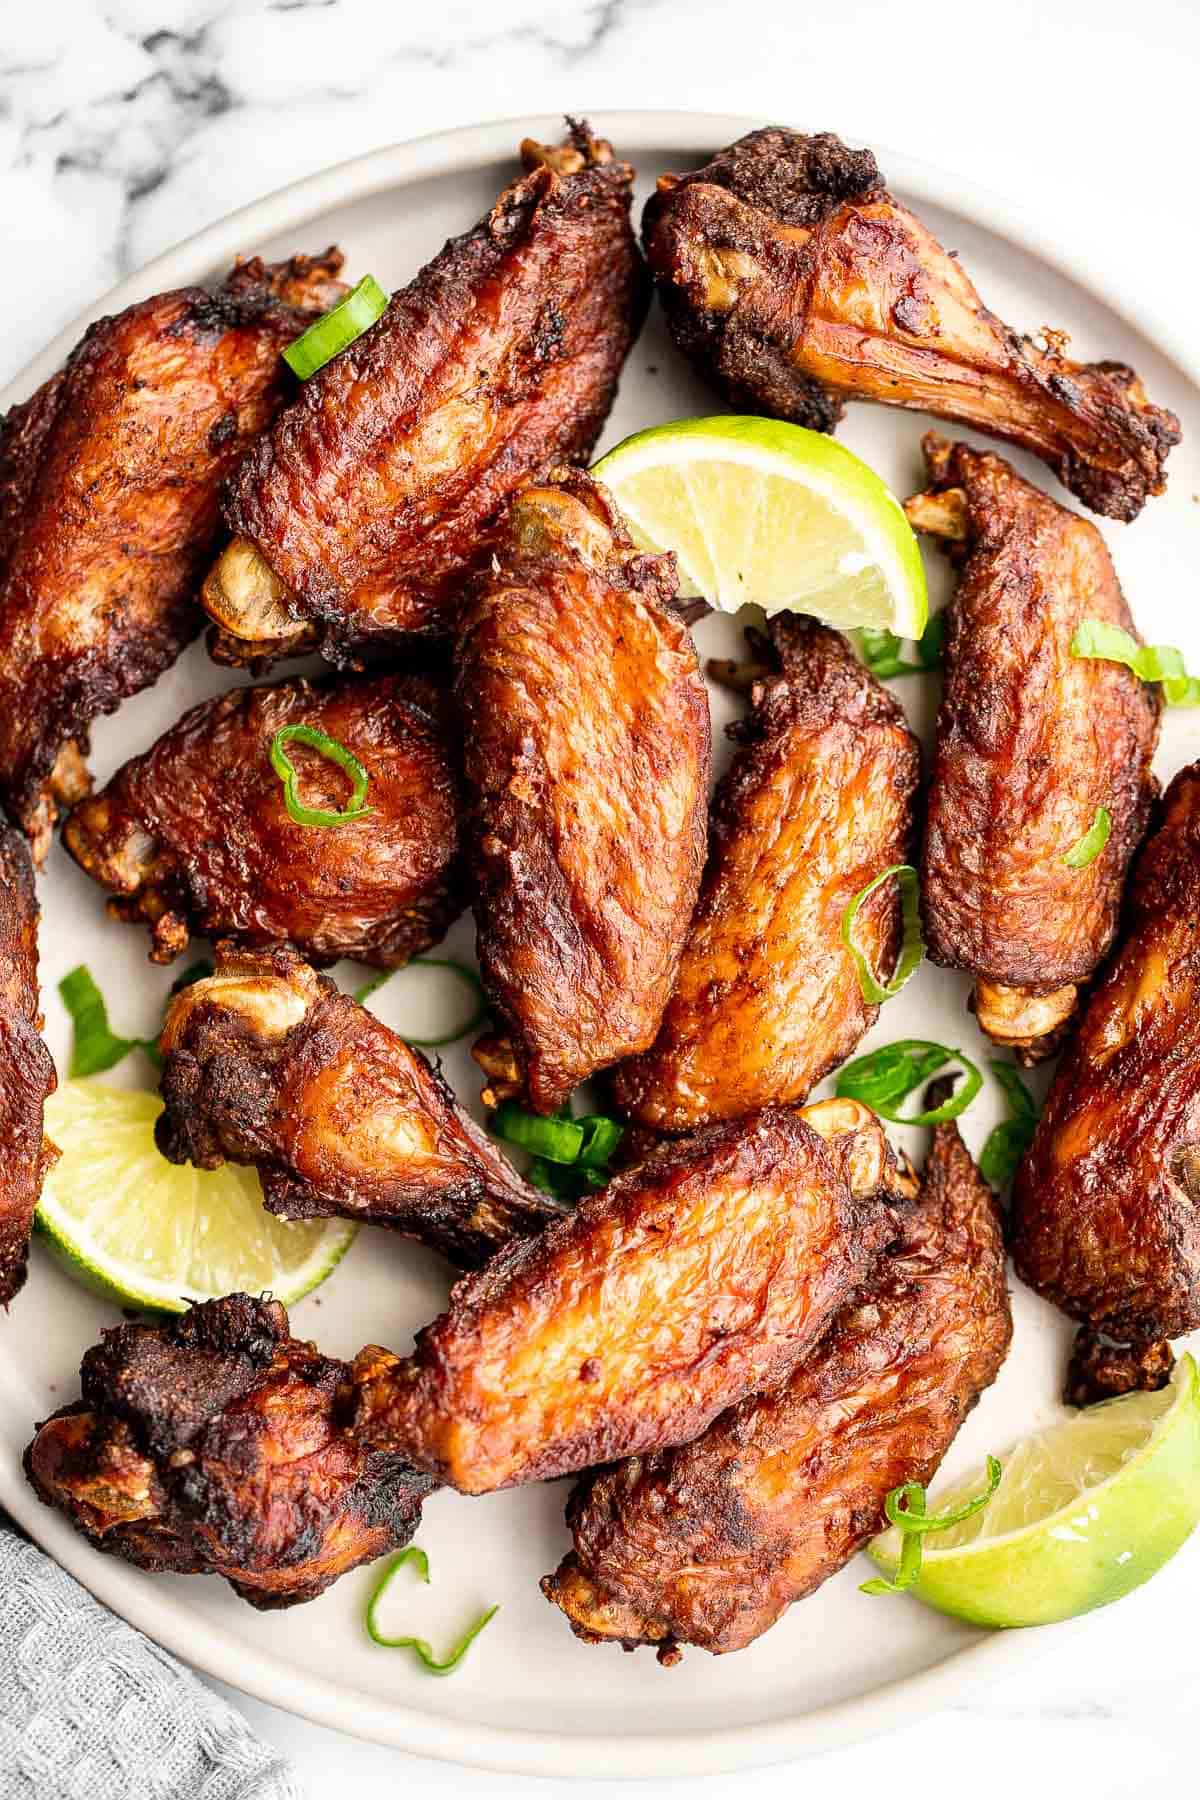 Jamaican jerk chicken wings with delicious crispy skin and tender and juicy meat are loaded with flavor. They're easy to make on the oven, grill, air fryer. | aheadofthyme.com